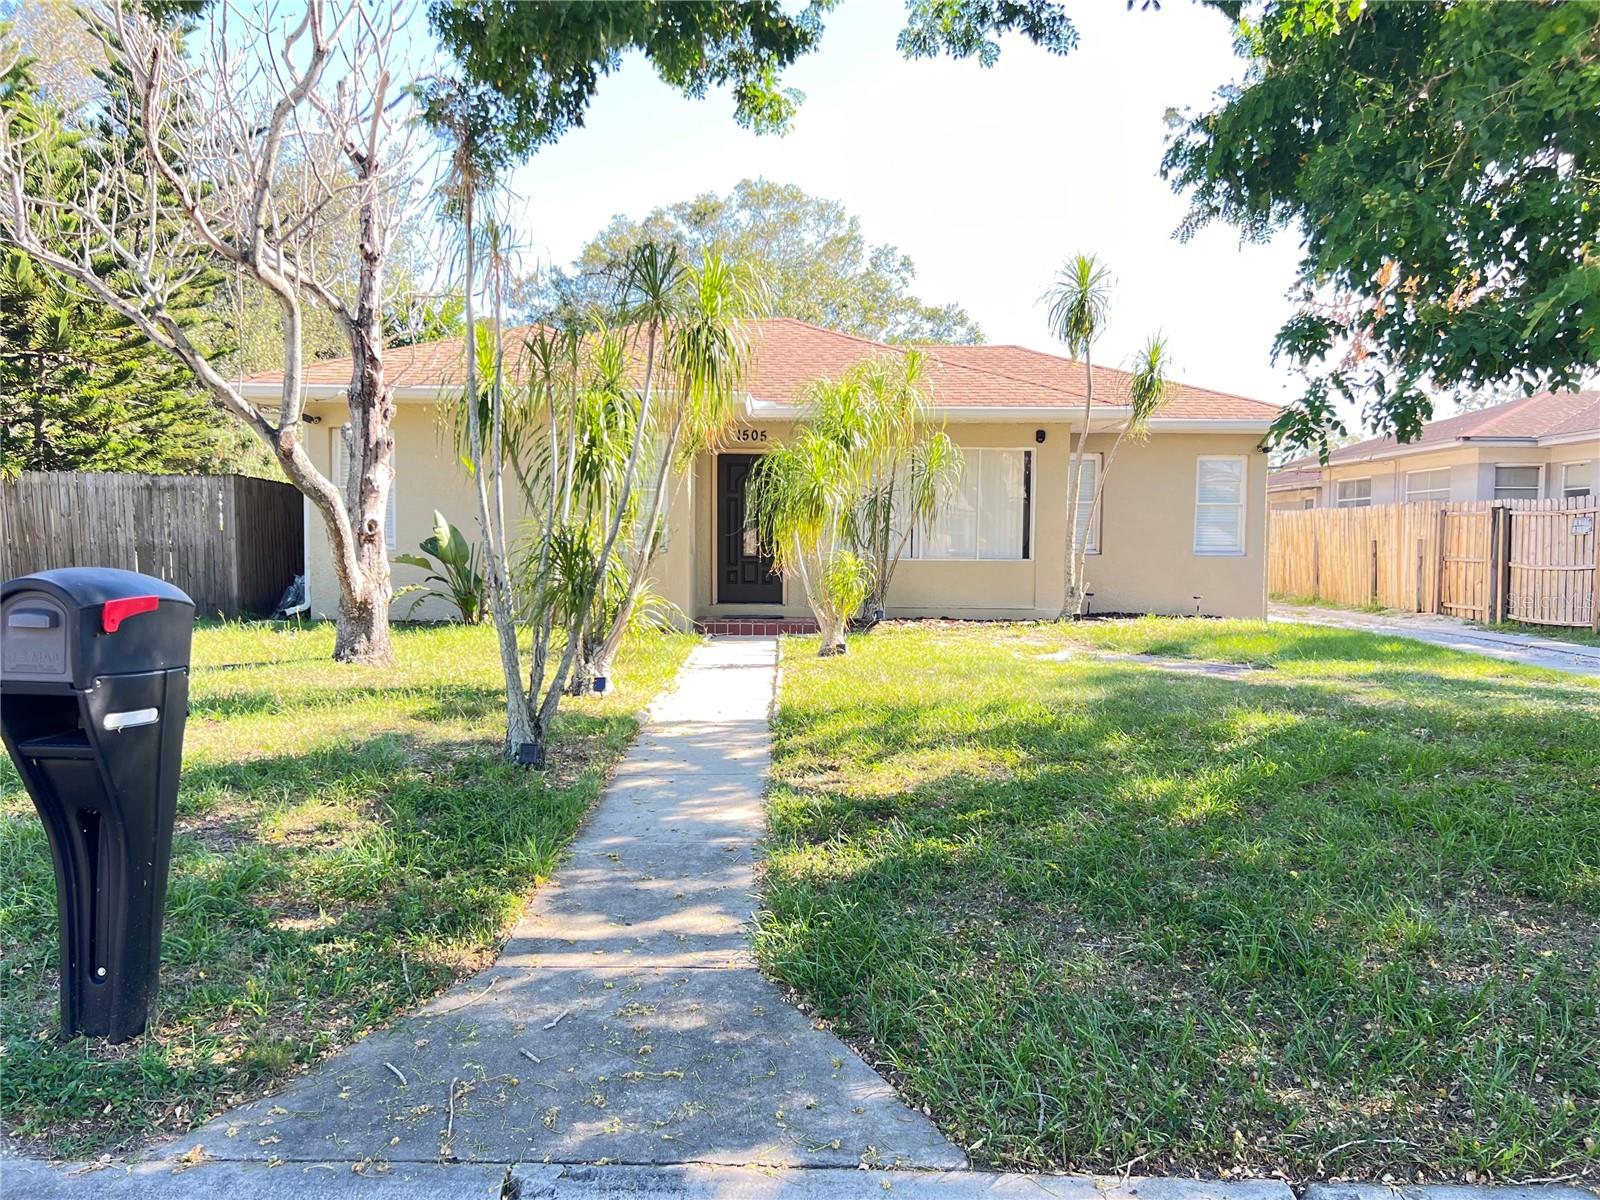 For sale: 1505 LAURA STREET, CLEARWATER FL 33755, CLEARWATER, FL